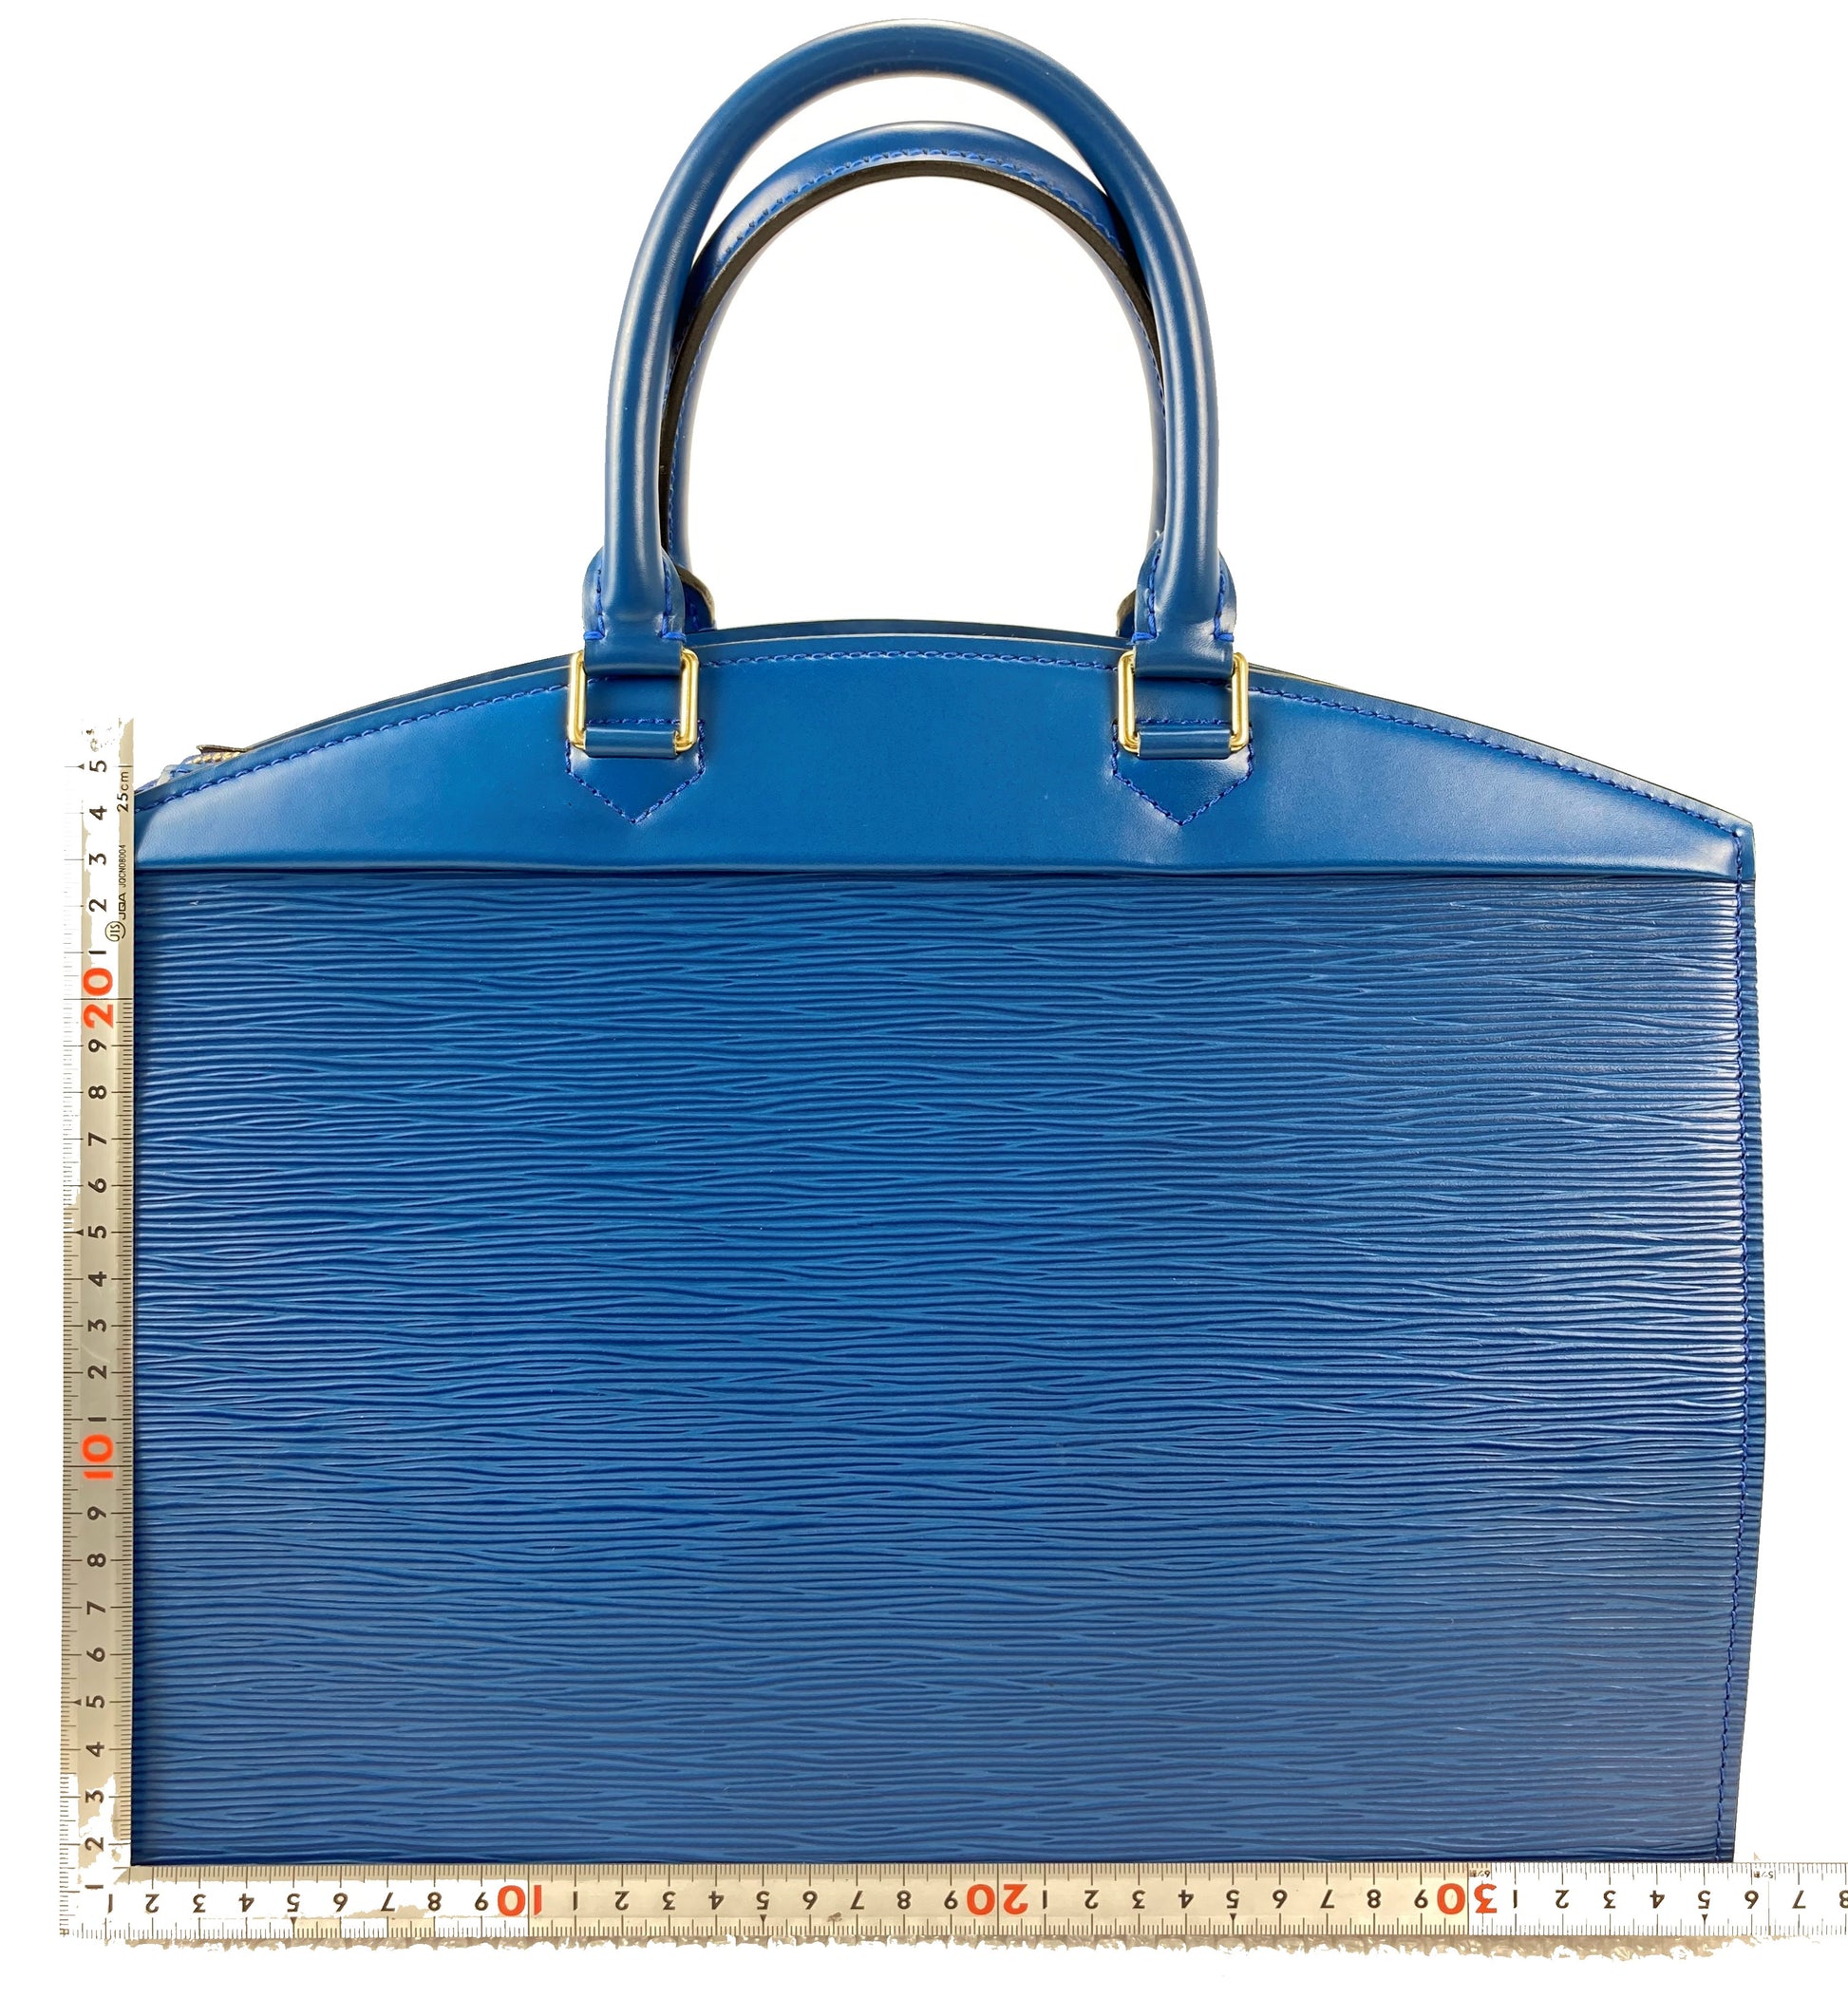 Louis Vuitton Epi Leather Riviera, What Fits In My Bag